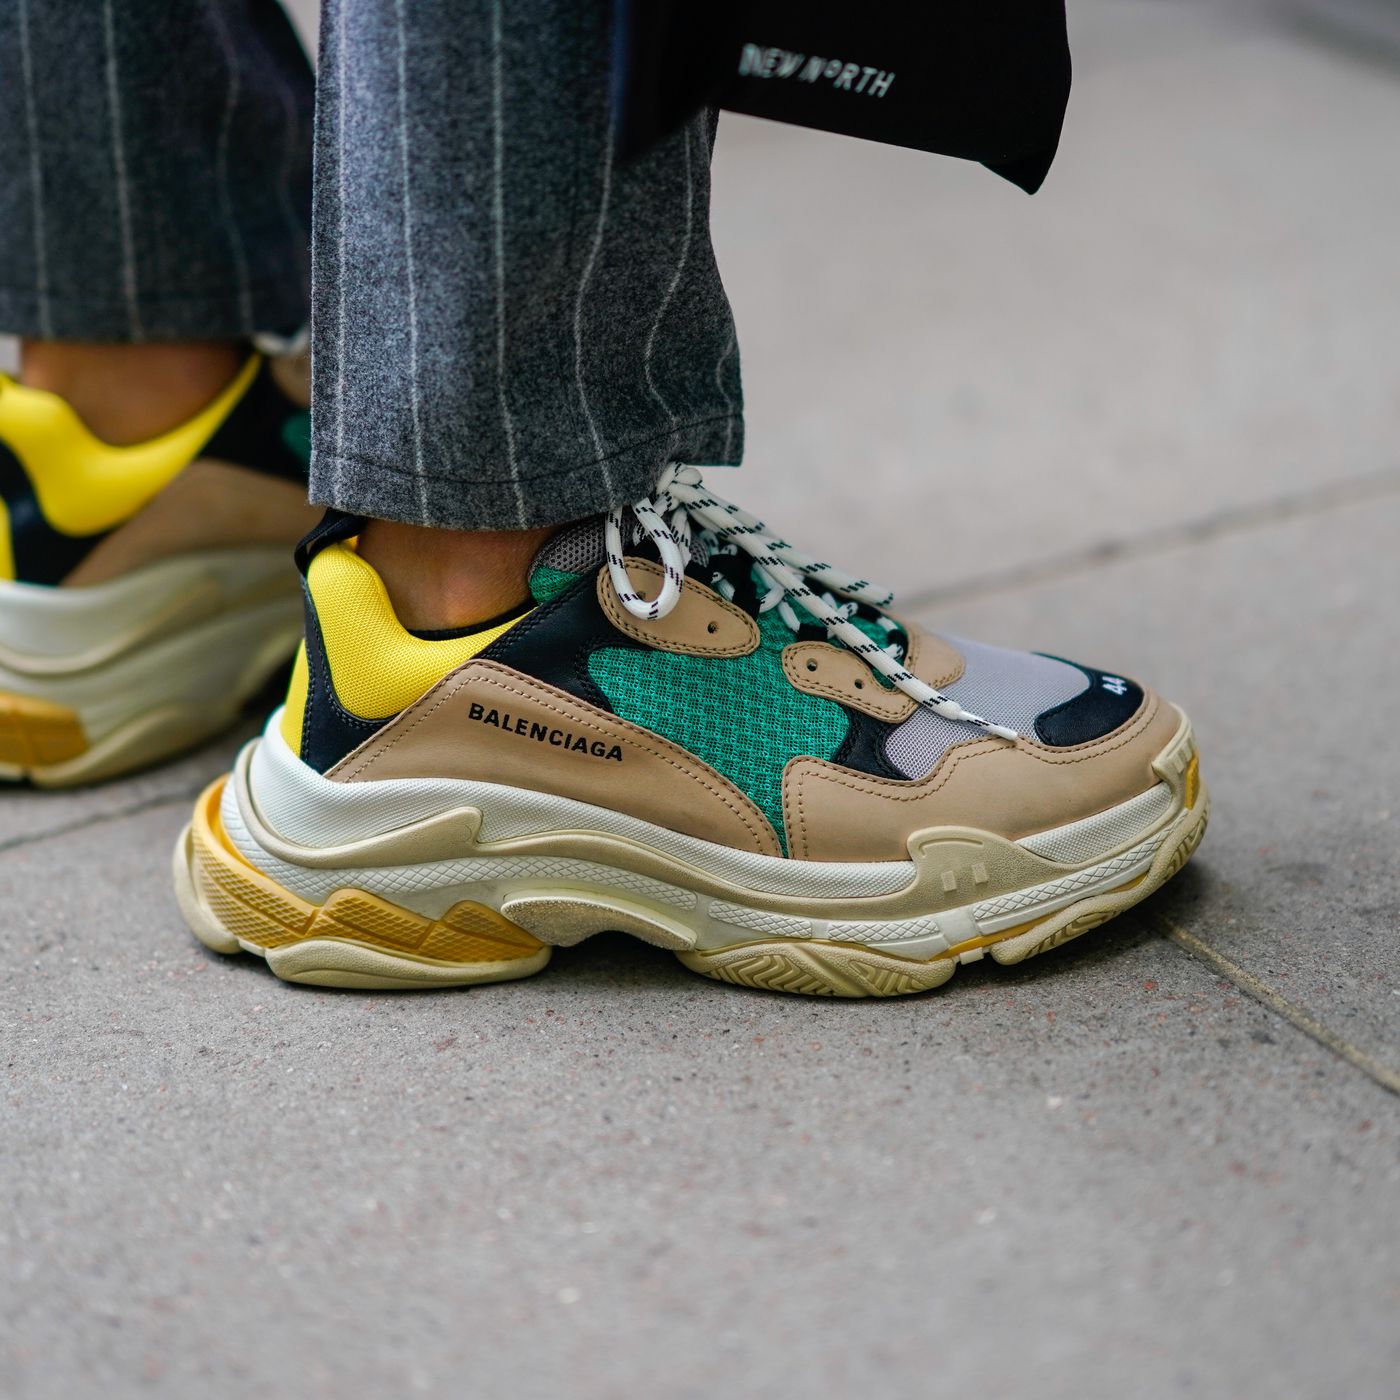 As and Balenciaga Sneakers Surge, Preppy Shoes Are - Racked